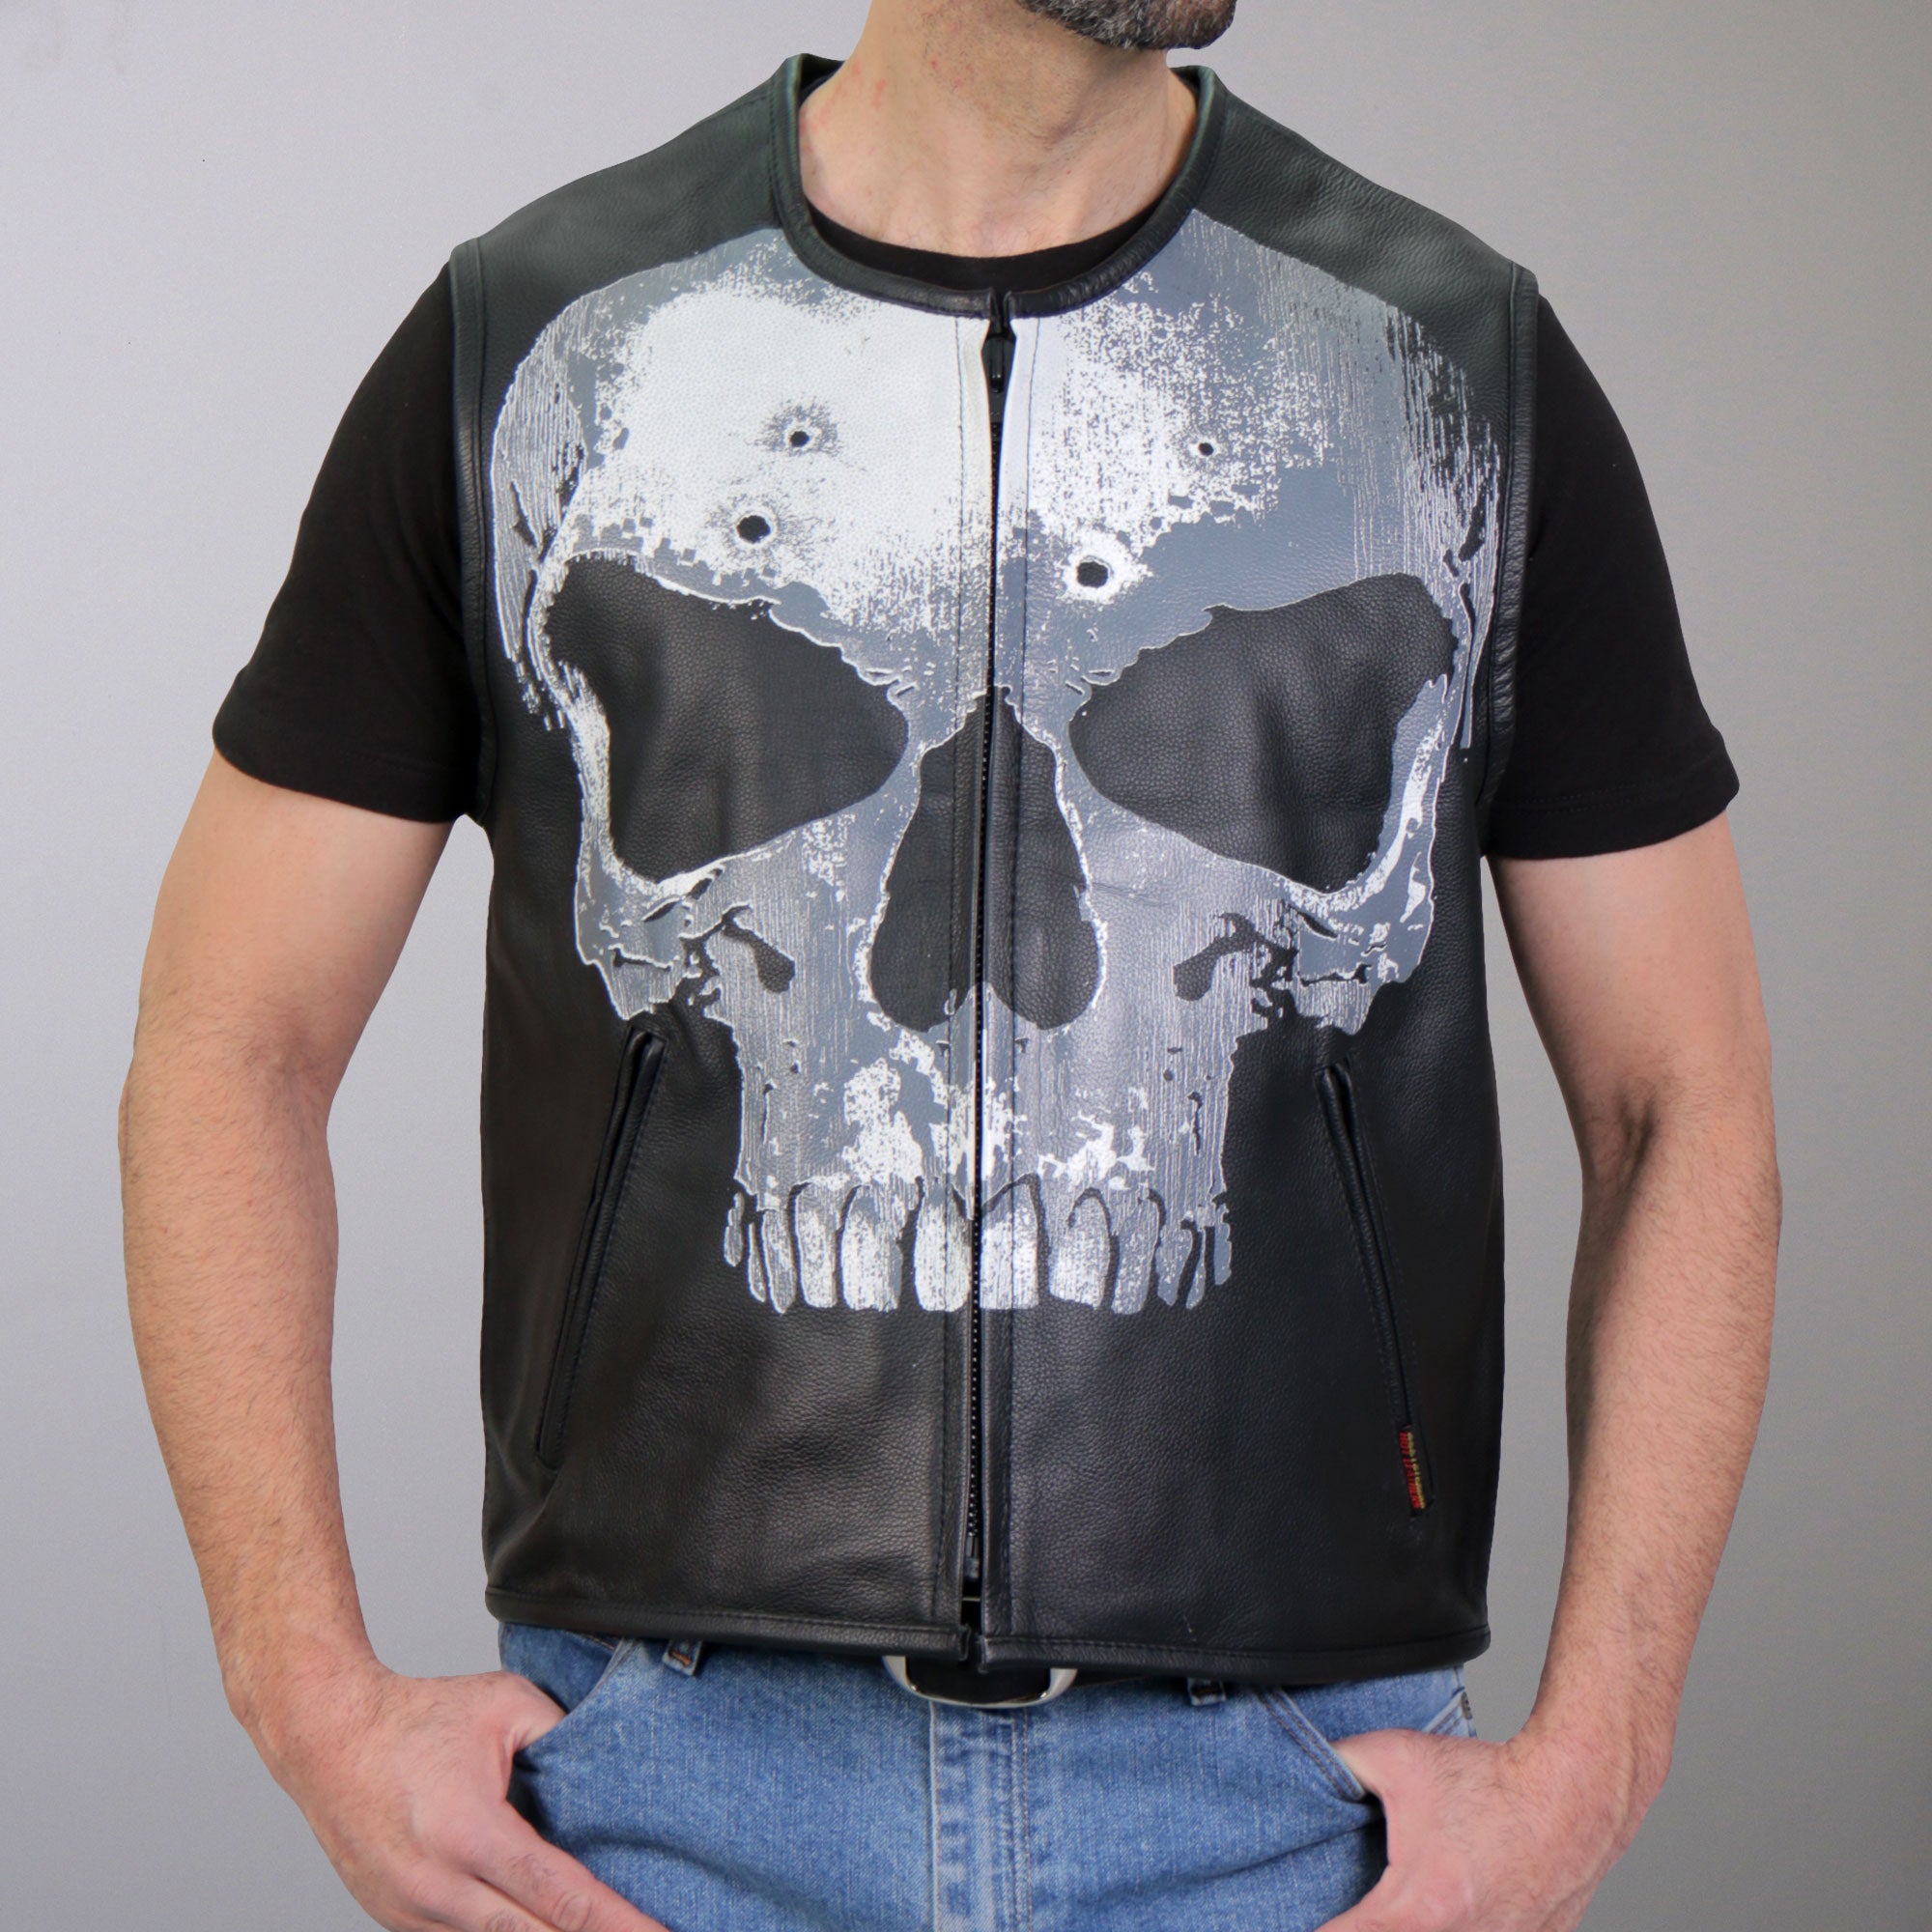 Image of Hot Leathers VSM2001 Men's Black Motorcycle Club style Jumbo Skull Conceal and Carry Leather Biker Vest